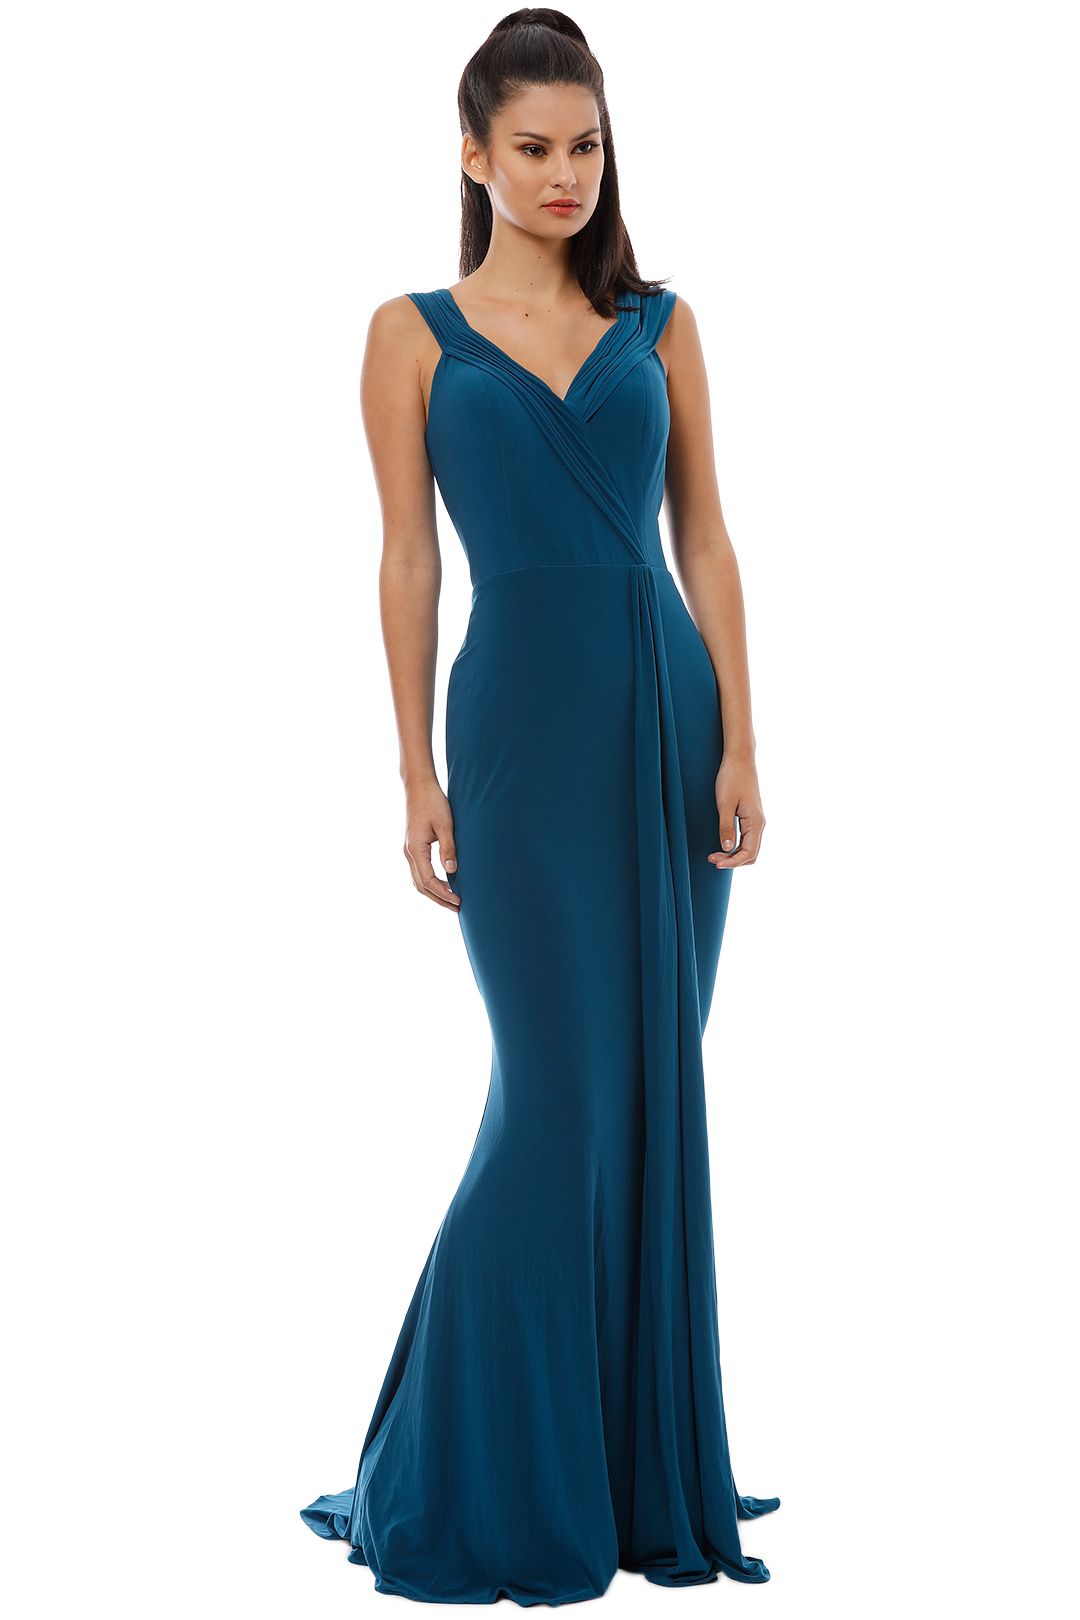 Tania Olsen - Malissa Gown - Teal - Side